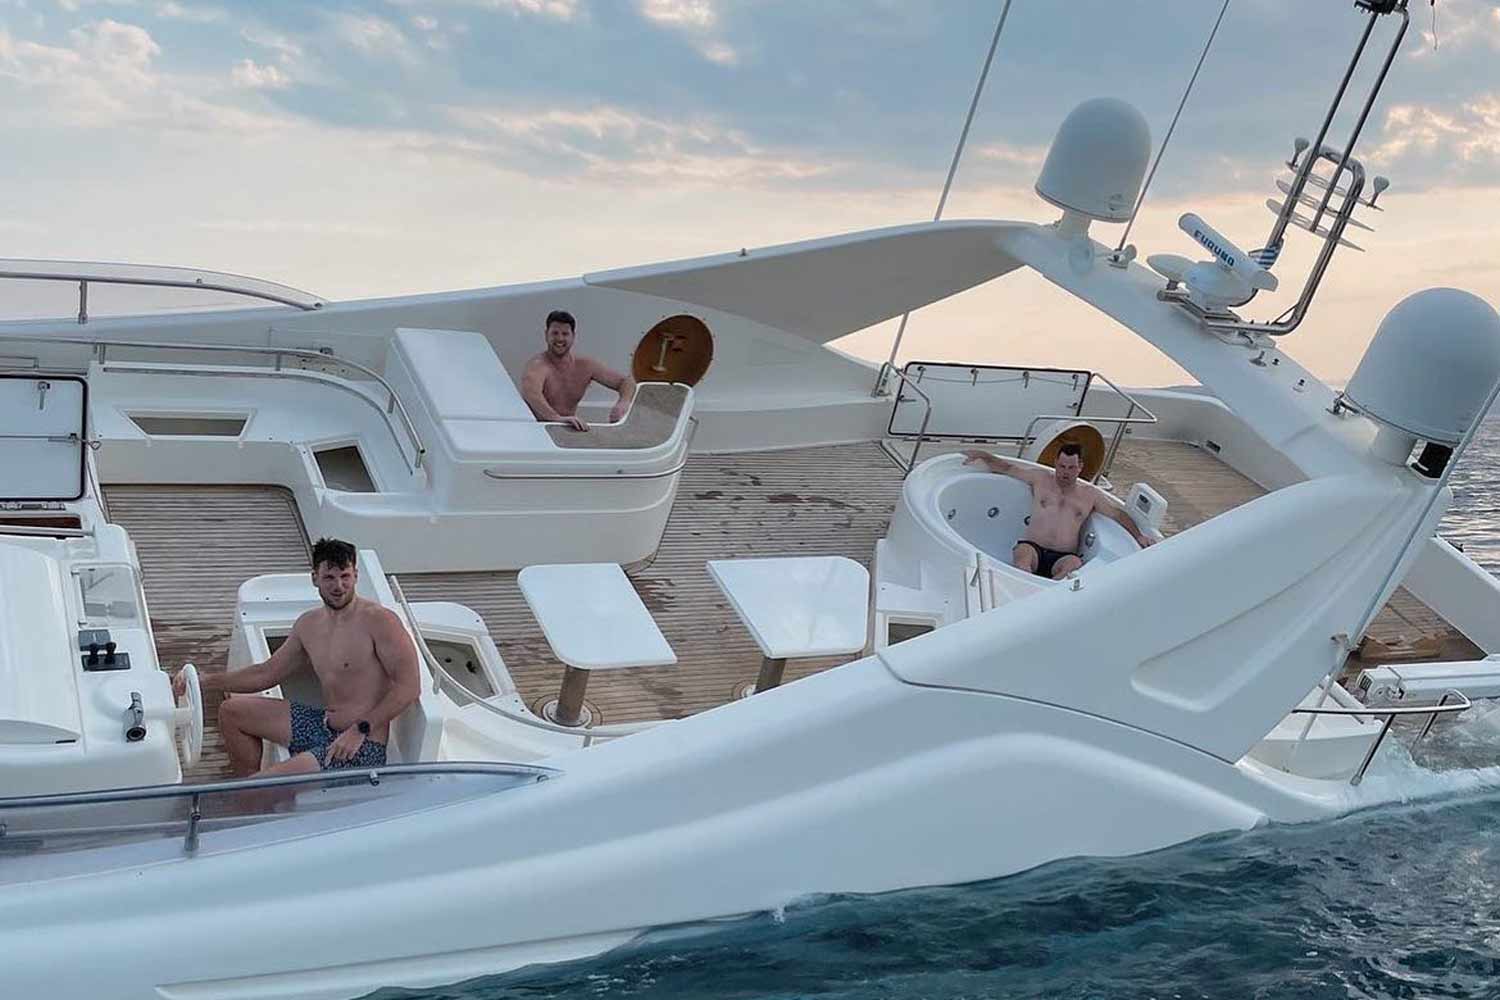 Lads’ Yacht Outing Goes Horribly Wrong In Greece